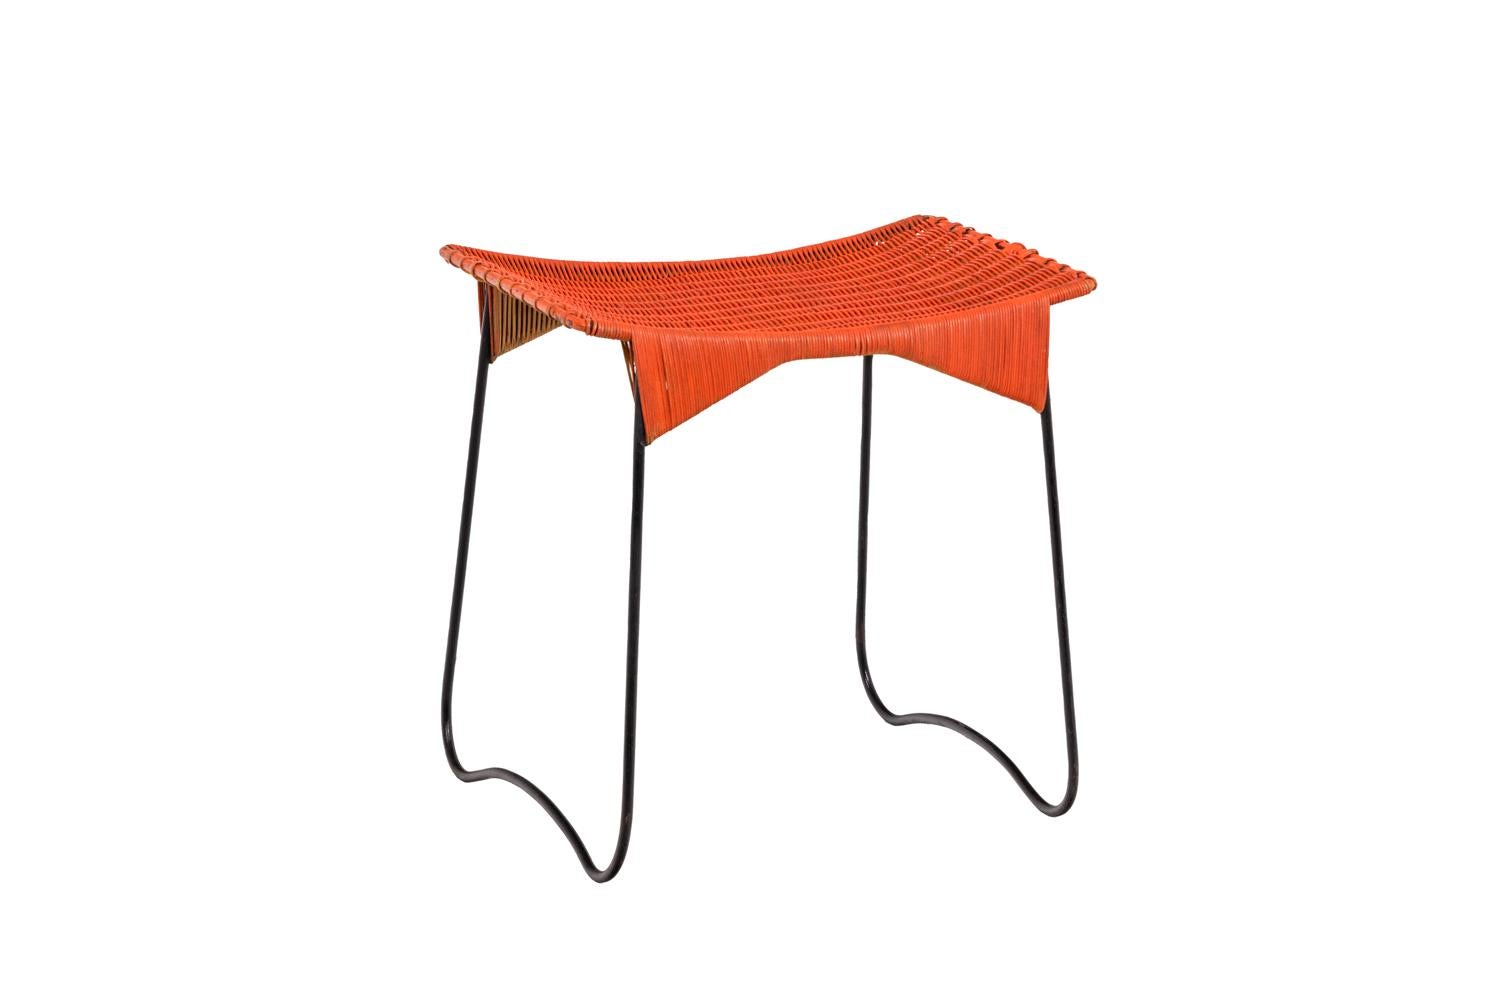 Raoul Guys, attributed to.
Airborne, edited by. 

Pair of stools in rattan lacquered in orange color. Tubular base in metal laquered in black color.

French work realized in the 1960s.

Dimensions : H 49 x W 49 x D 33 cm

Reference :